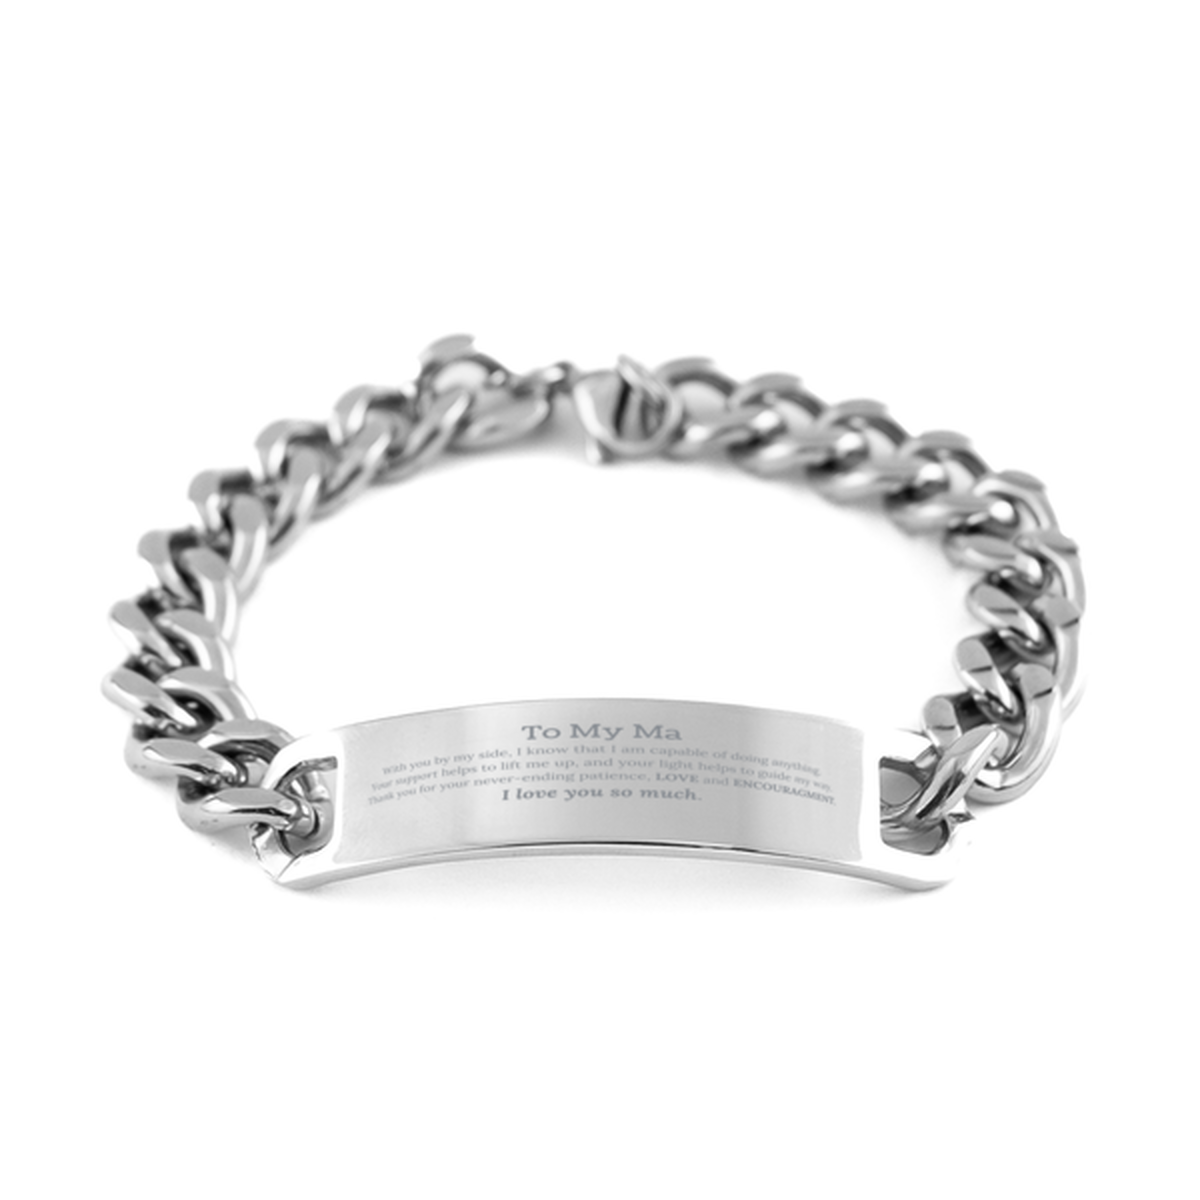 Appreciation Ma Cuban Chain Stainless Steel Bracelet Gifts, To My Ma Birthday Christmas Wedding Keepsake Gifts for Ma With you by my side, I know that I am capable of doing anything. I love you so much